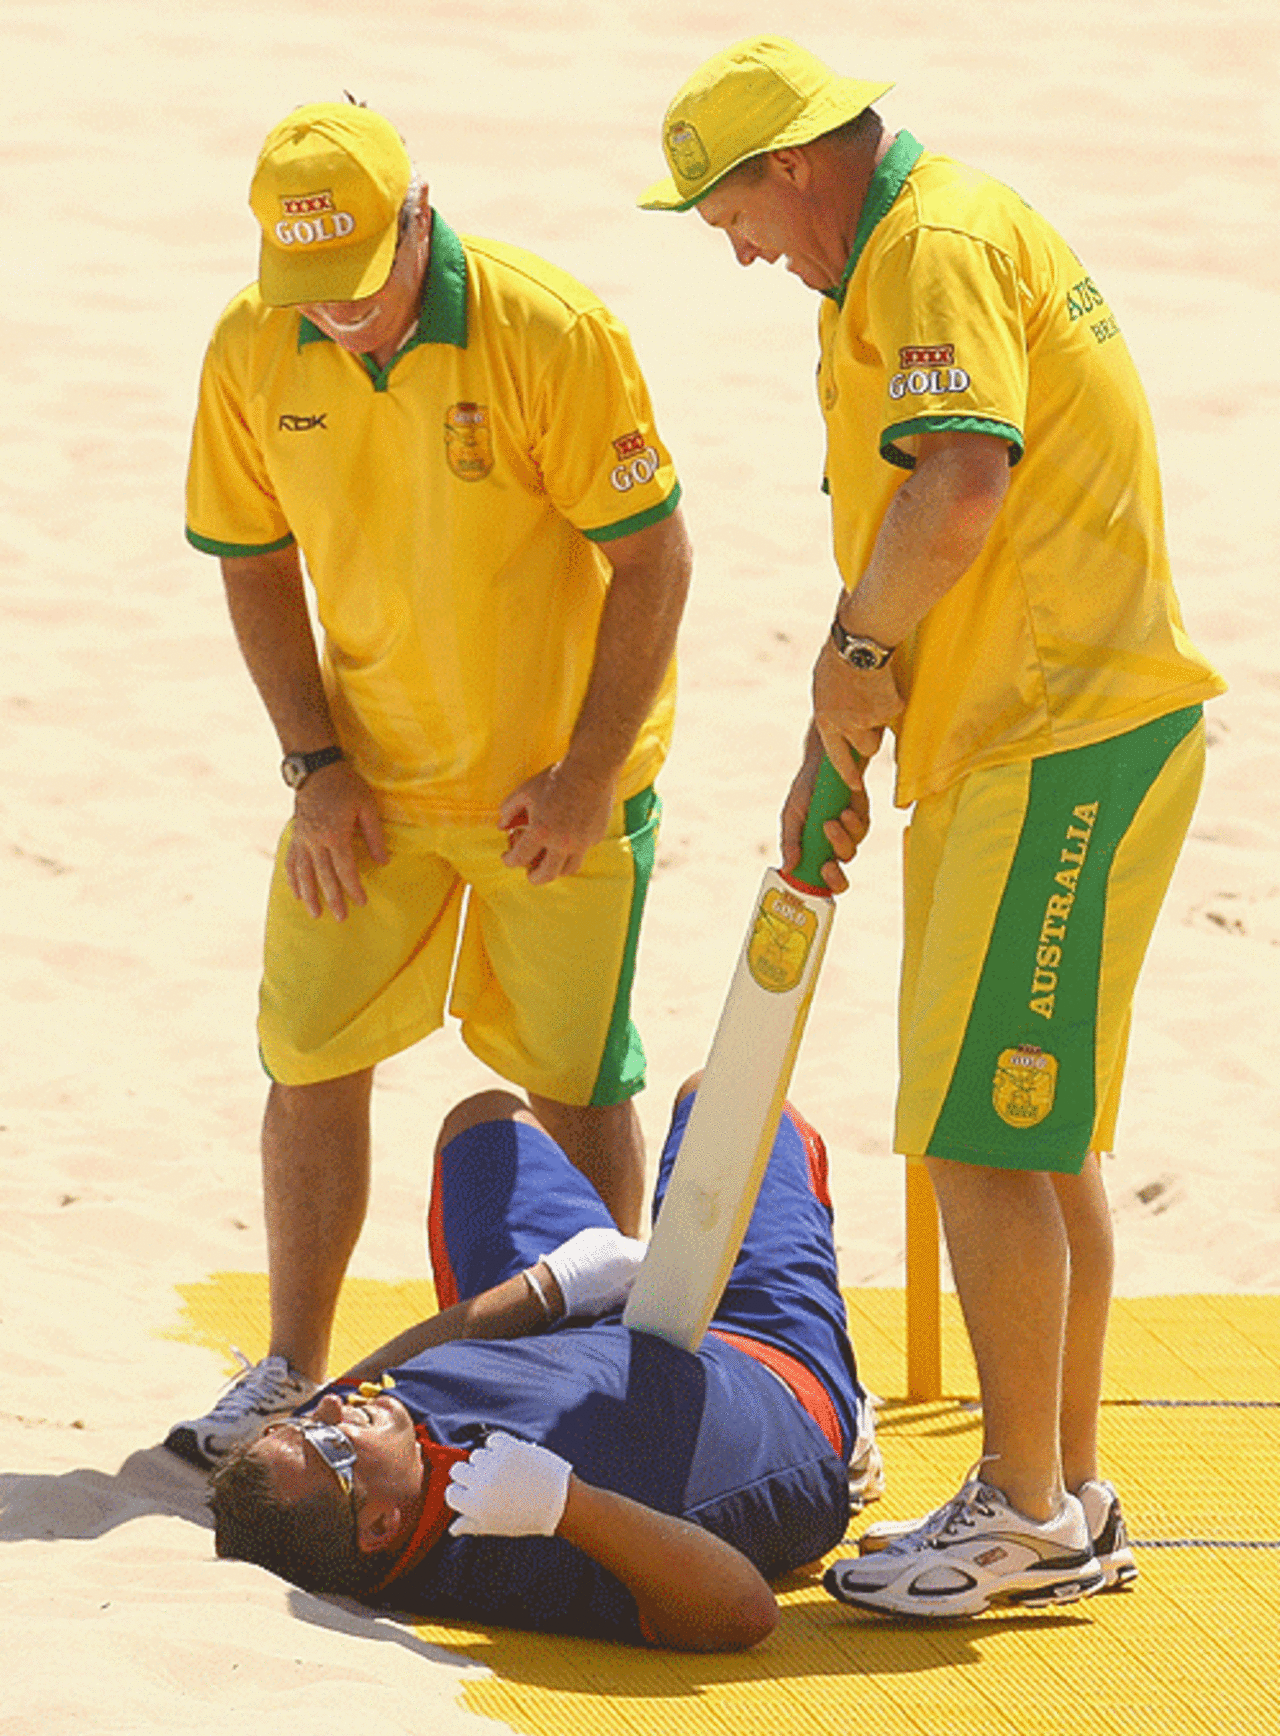 "So you're the one everyone's talking about, eh?" Allan Border and Dean Jones mess around with Darren Gough, Beach Cricket Tri-Nations series, Maroubra Beach, Sydney, February 3, 2007